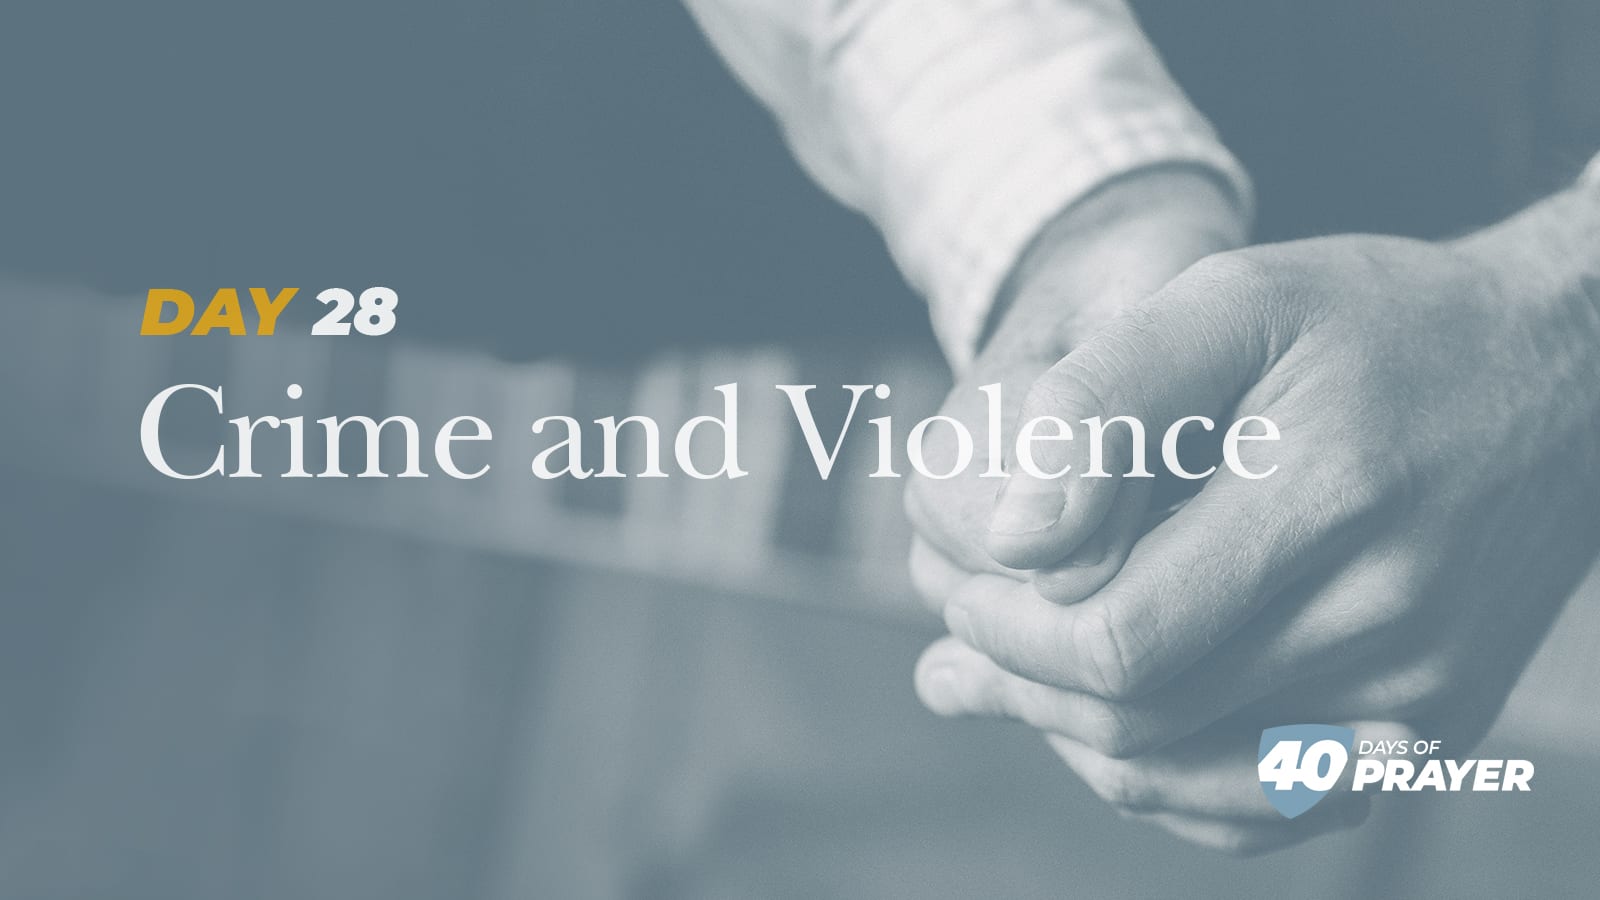 40 days of Prayer Day 28: Crime and Violence